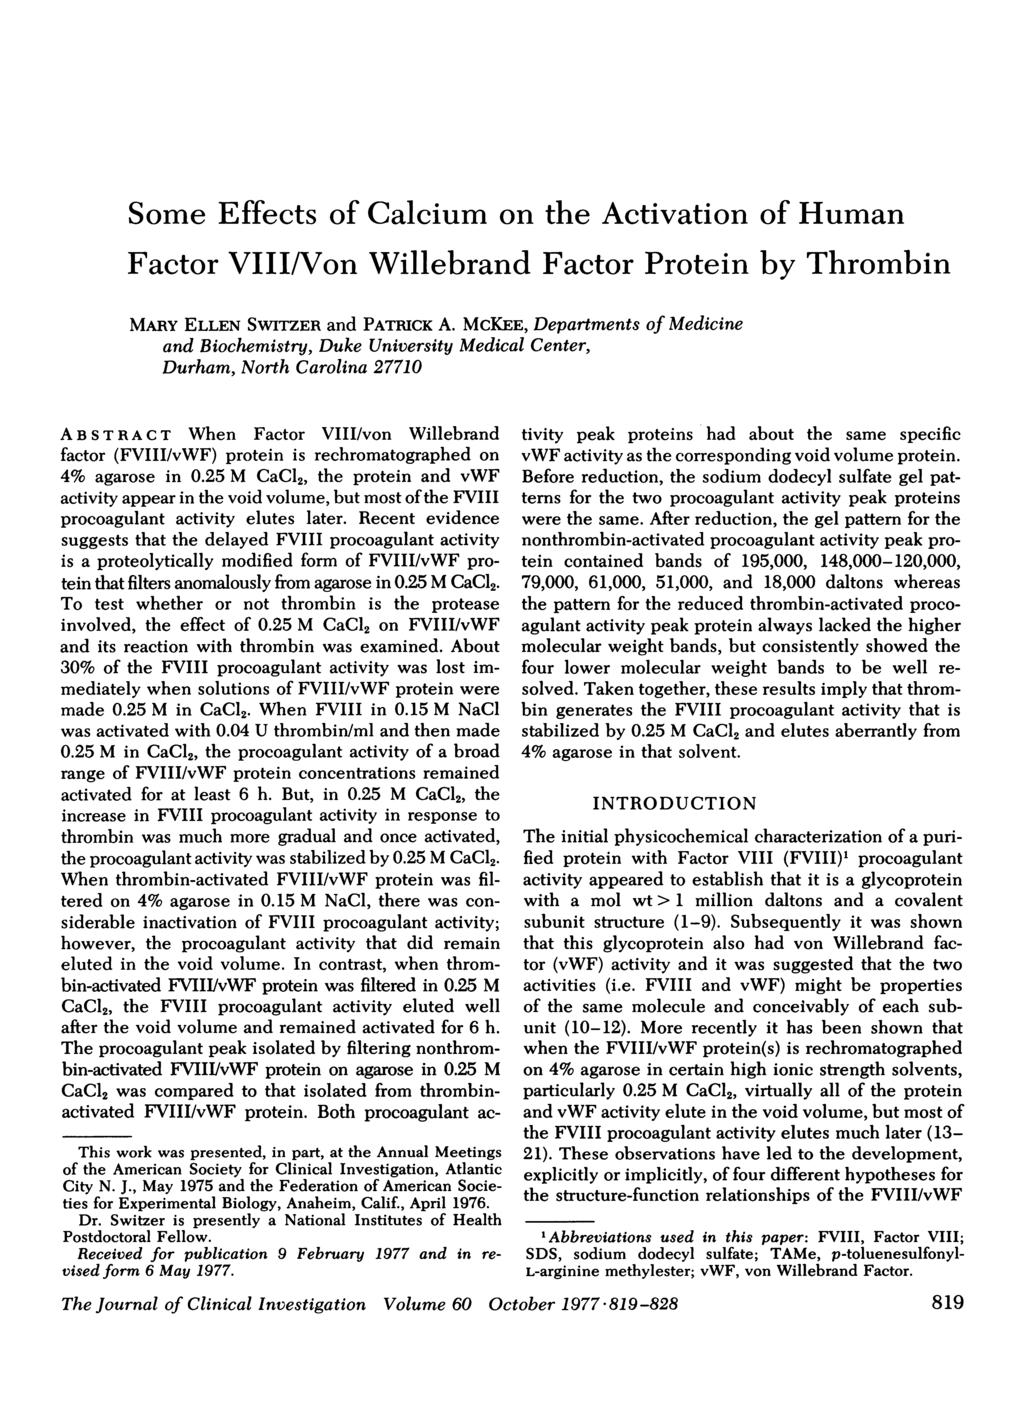 Some Effects of Calcium on the Activation of Human Factor VIII/Von Willebrand Factor Protein by Thrombin MARY ELLEN SWITZER and PATRICK A.